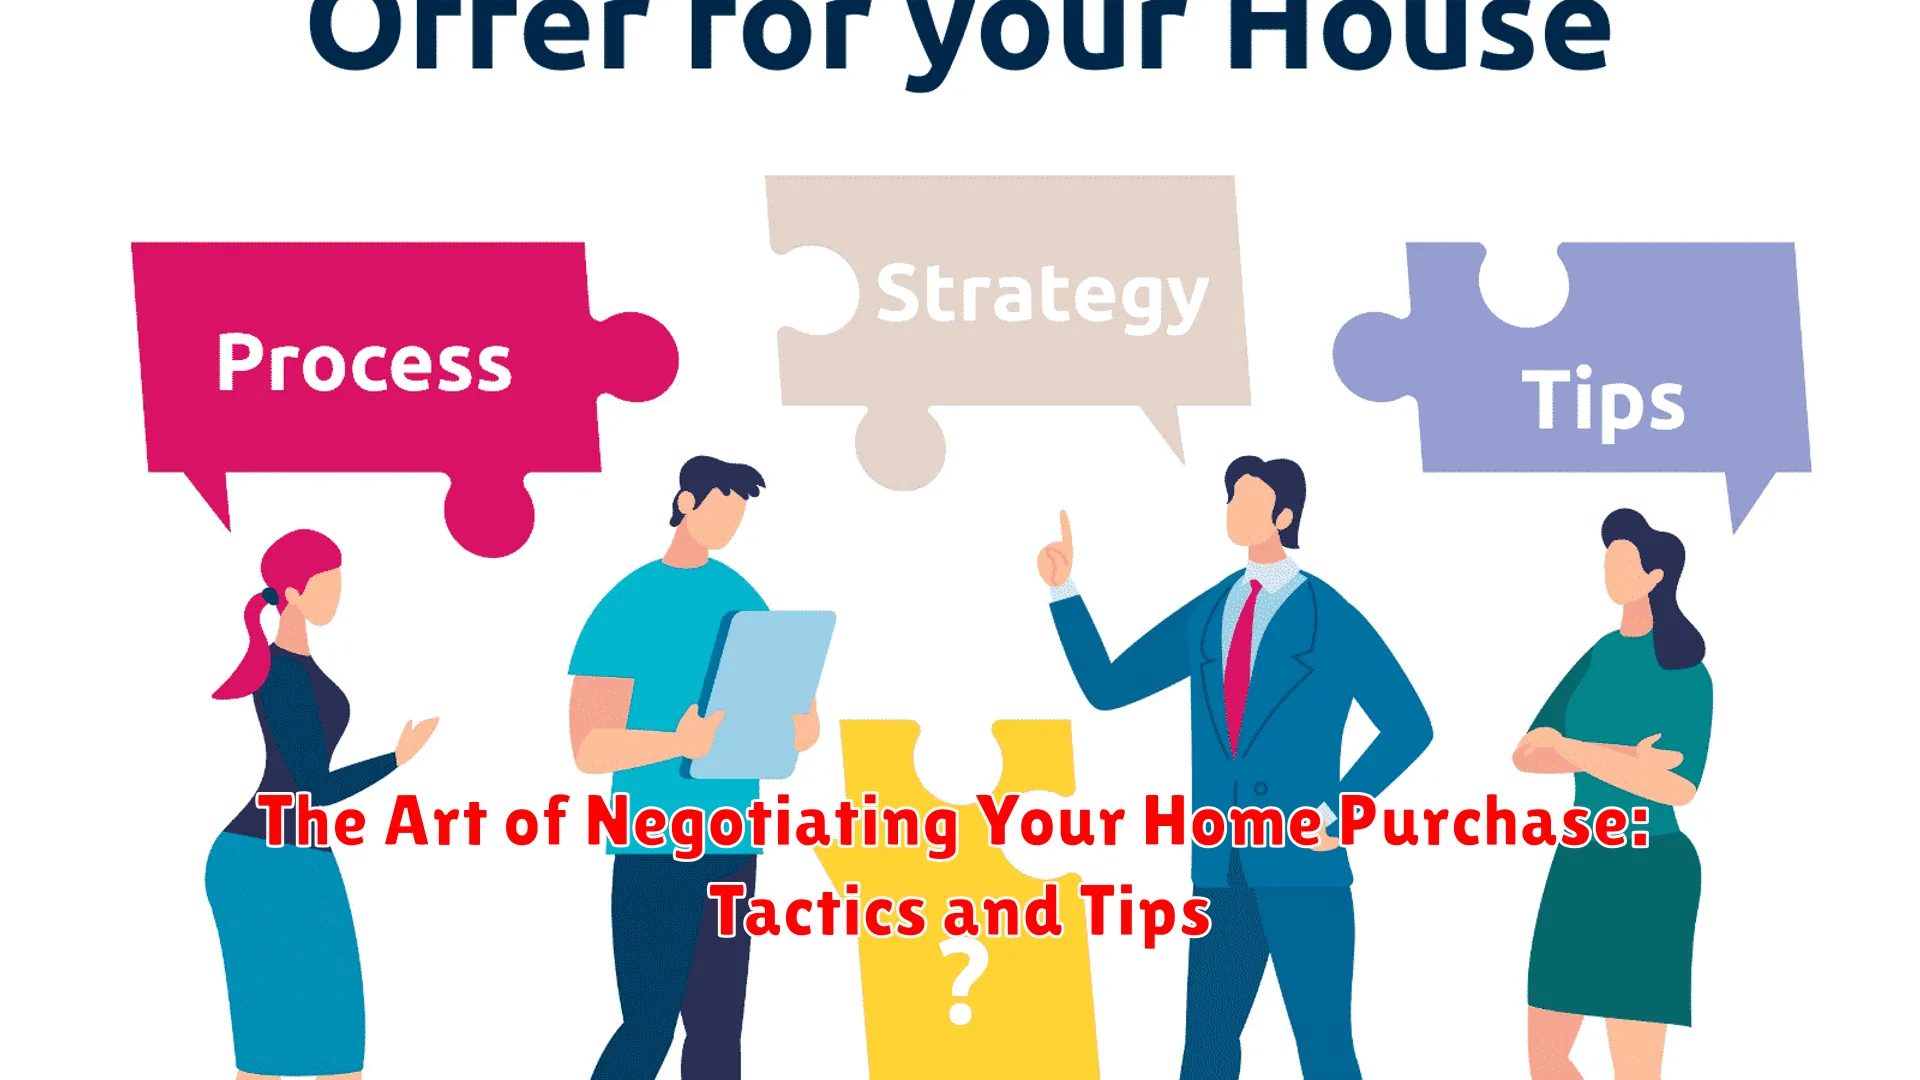 The Art of Negotiating Your Home Purchase: Tactics and Tips